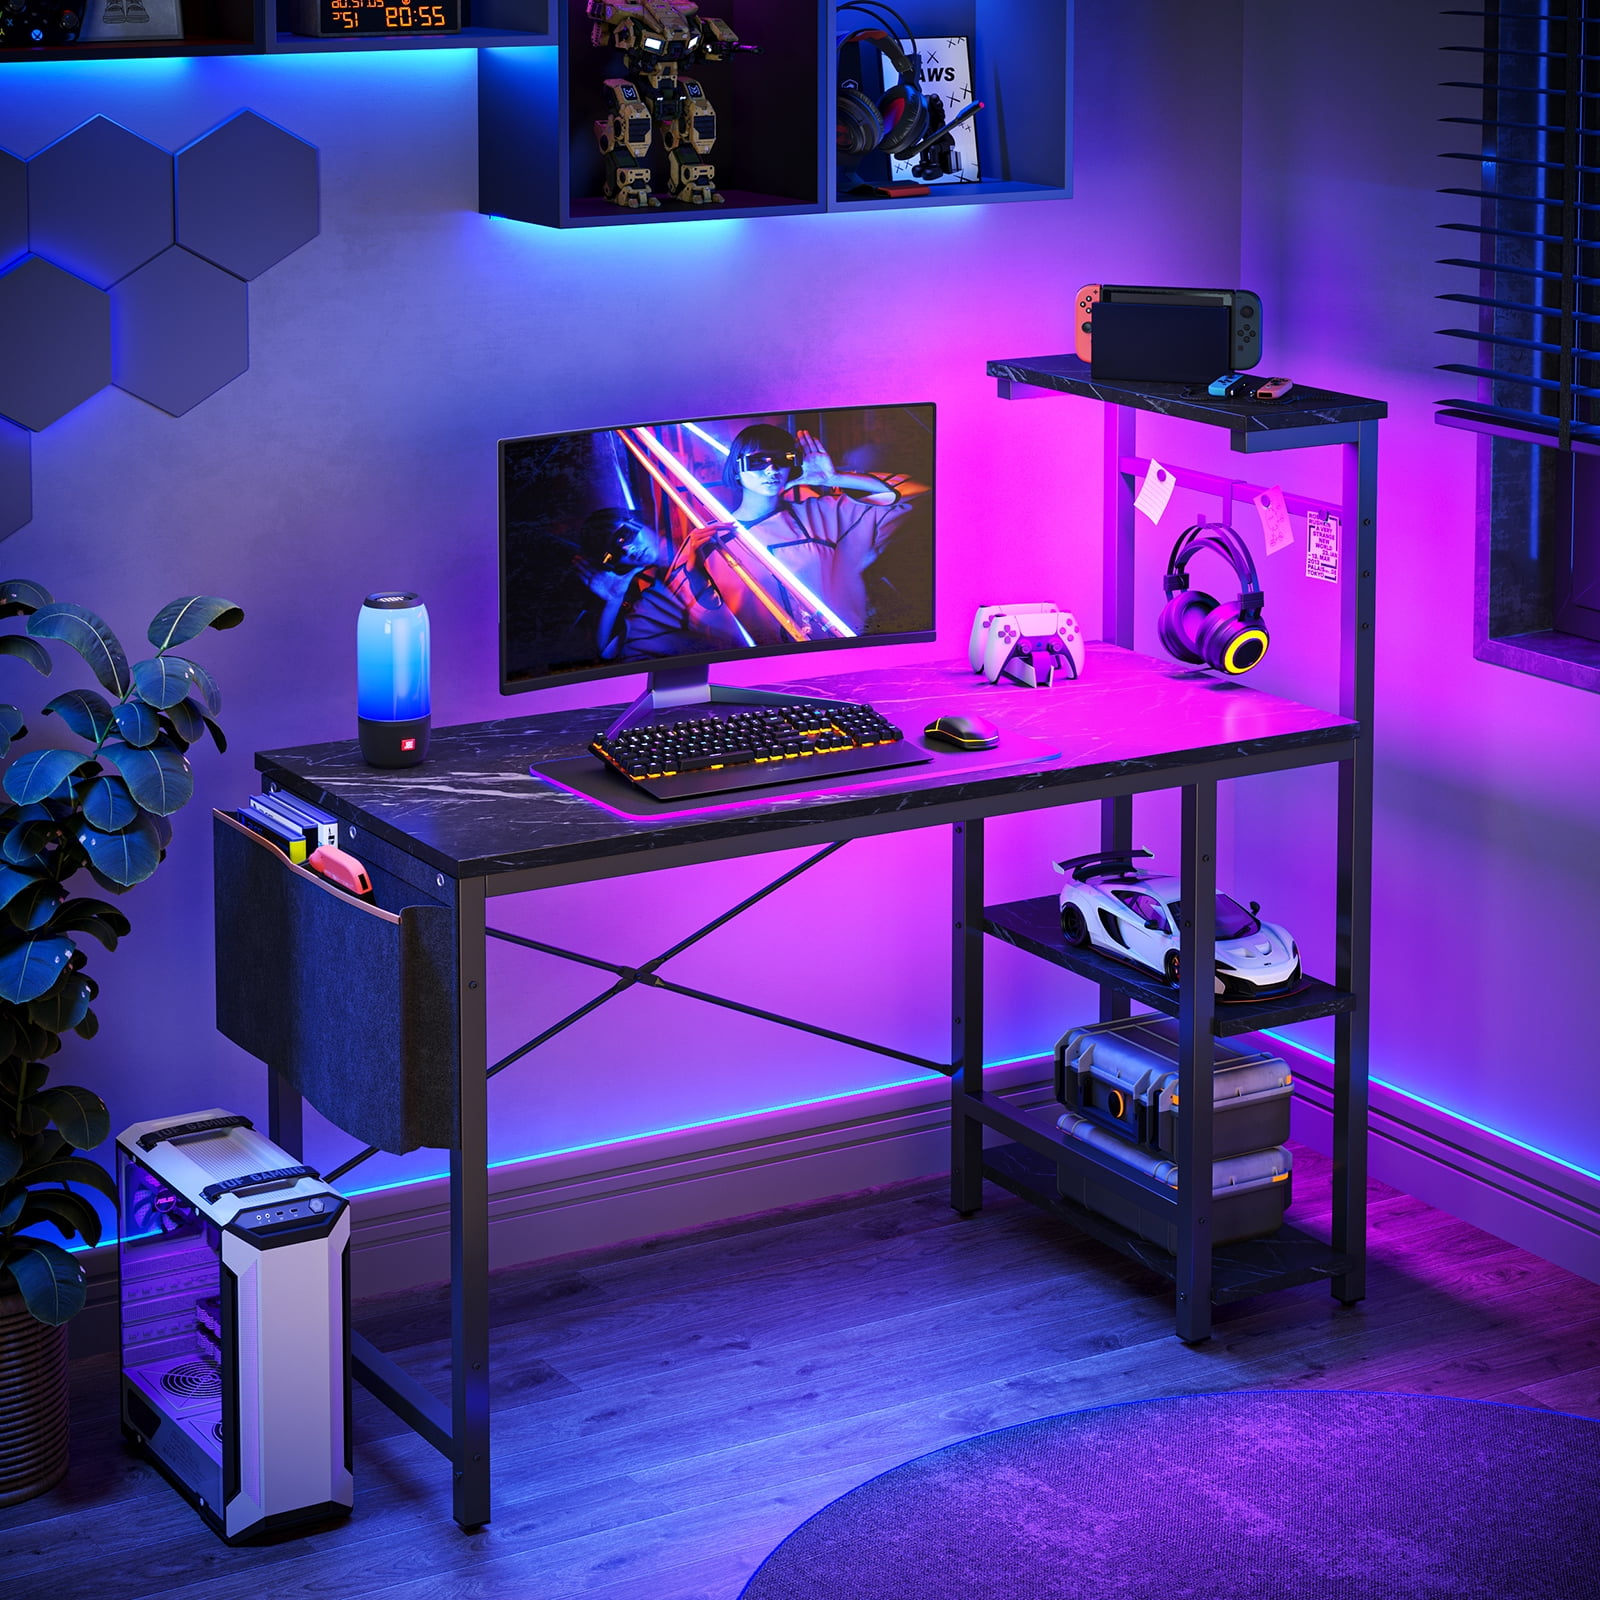 Bestier Reversible 44 inch Computer Desk with LED Lights Gaming Desk with 4 Tier Shelves Black Marble - image 1 of 7